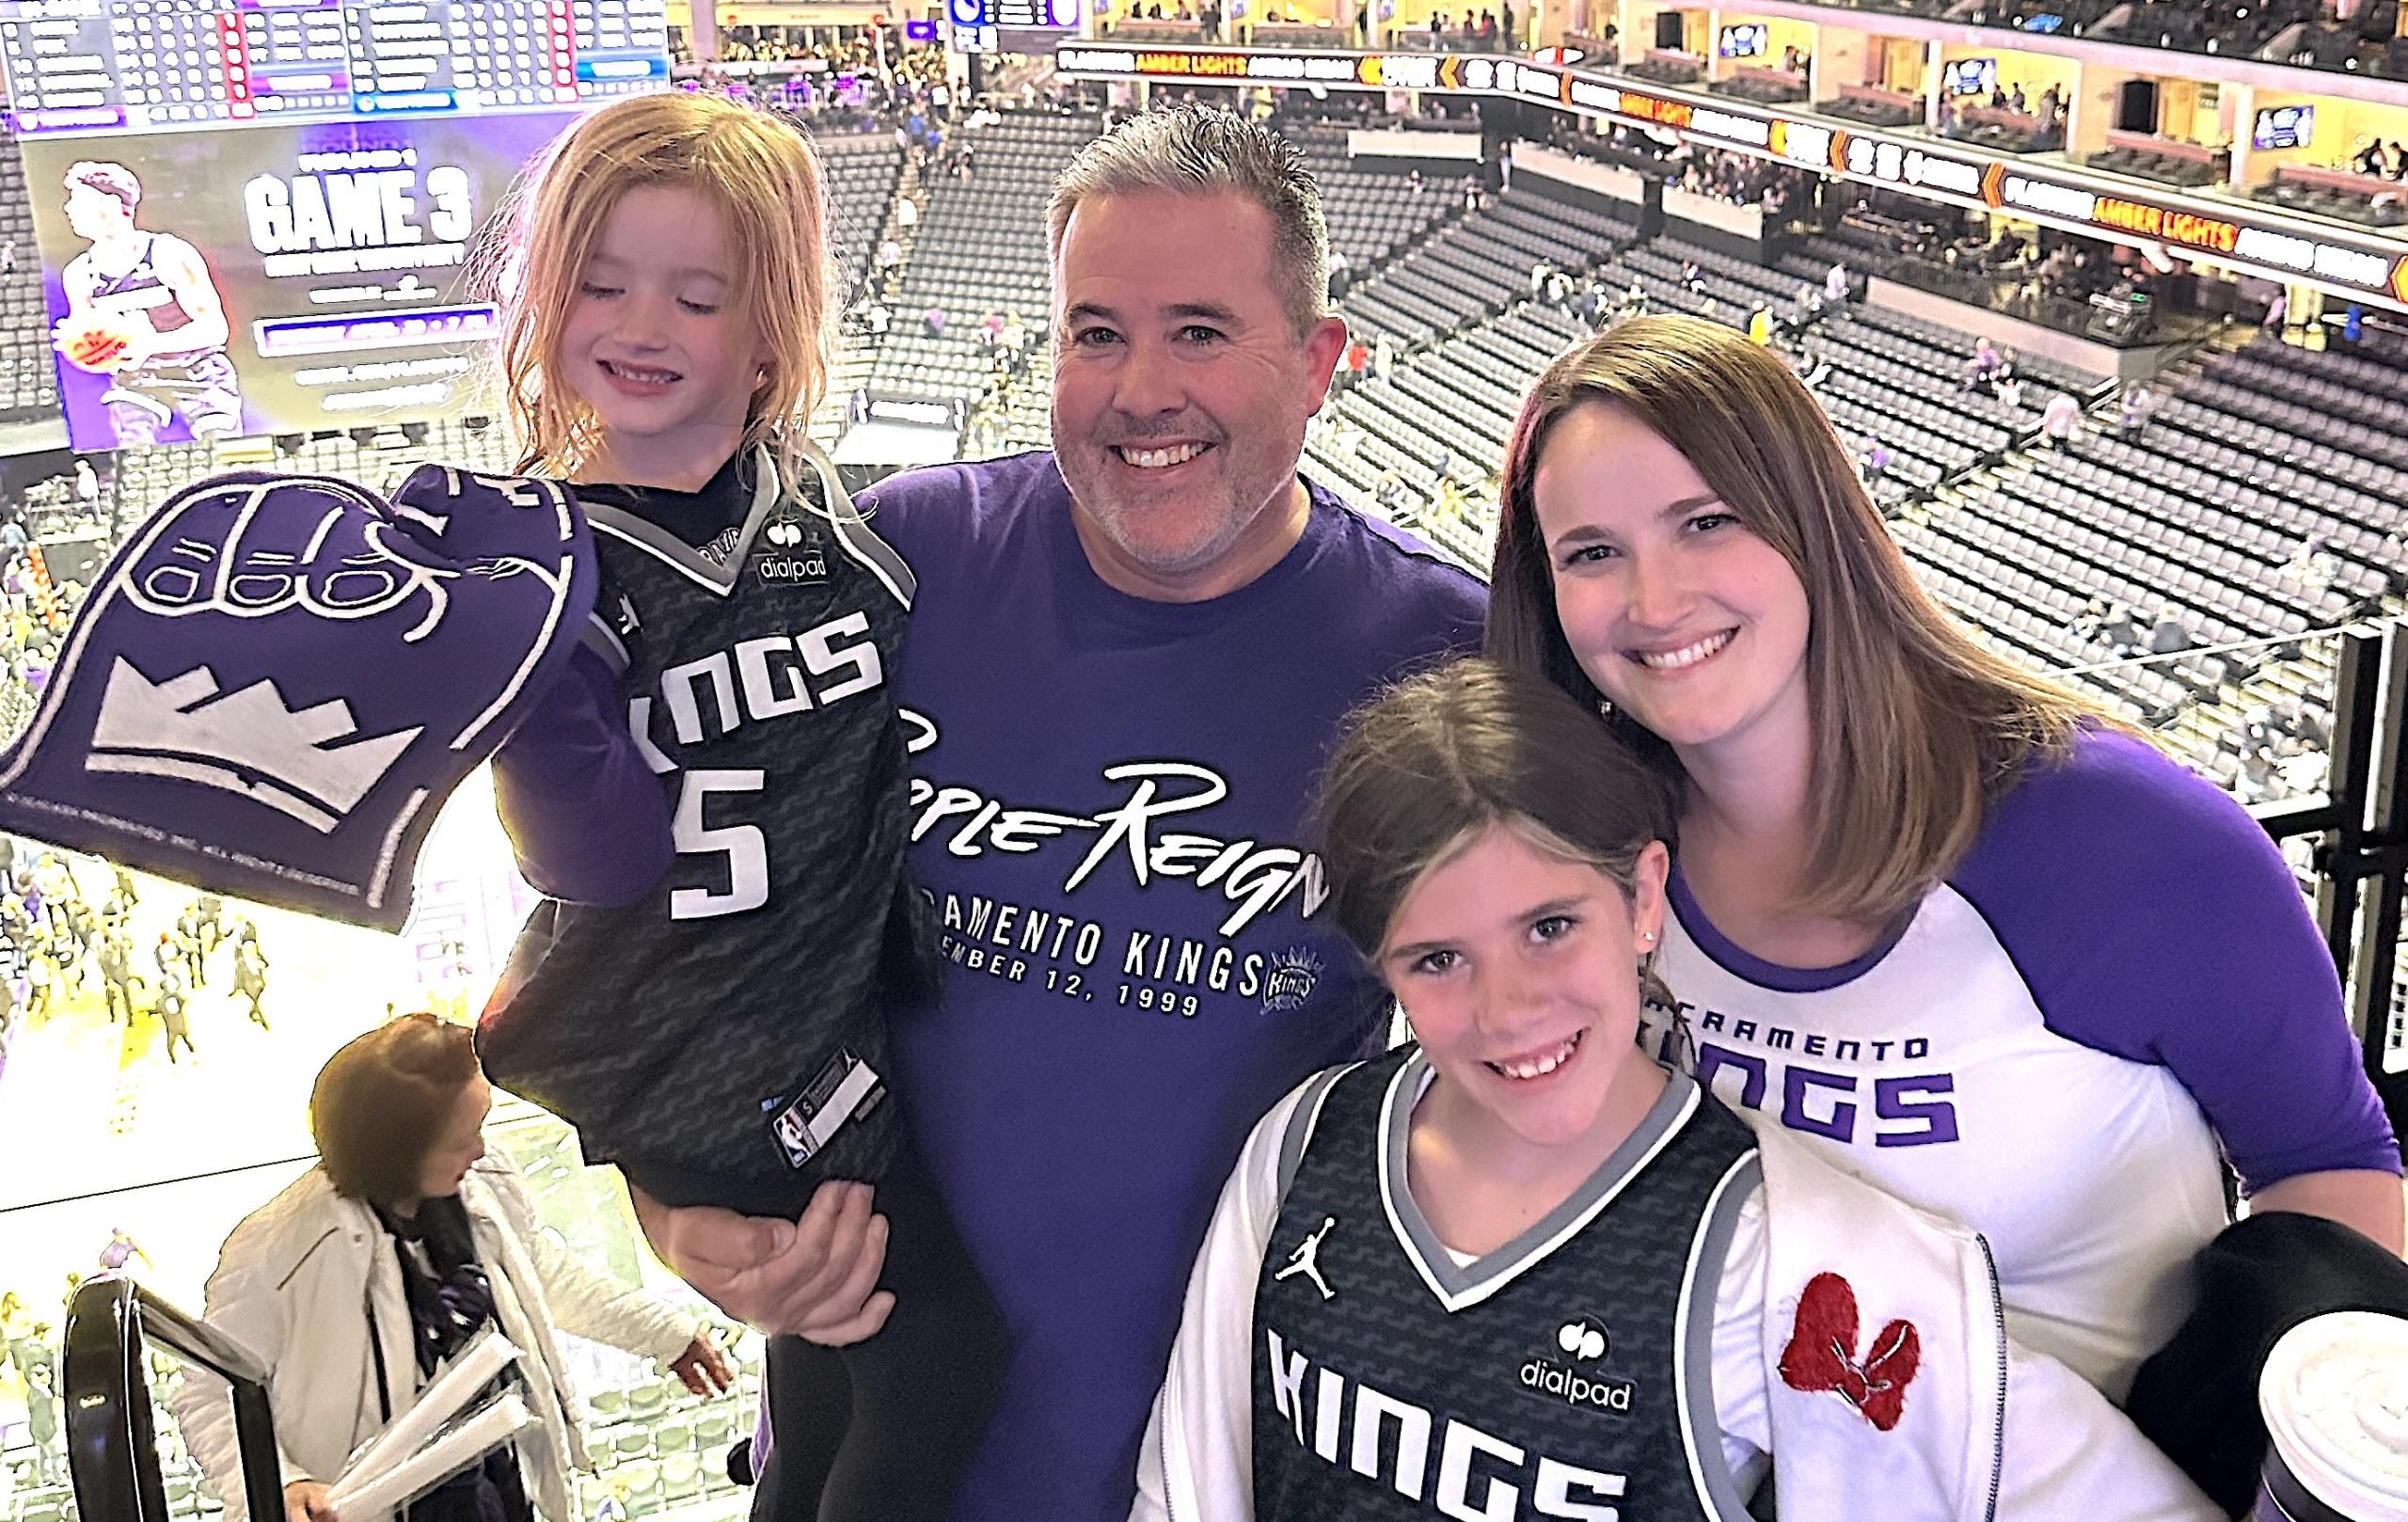 Local fans, businesses beaming amidst King’s playoff success